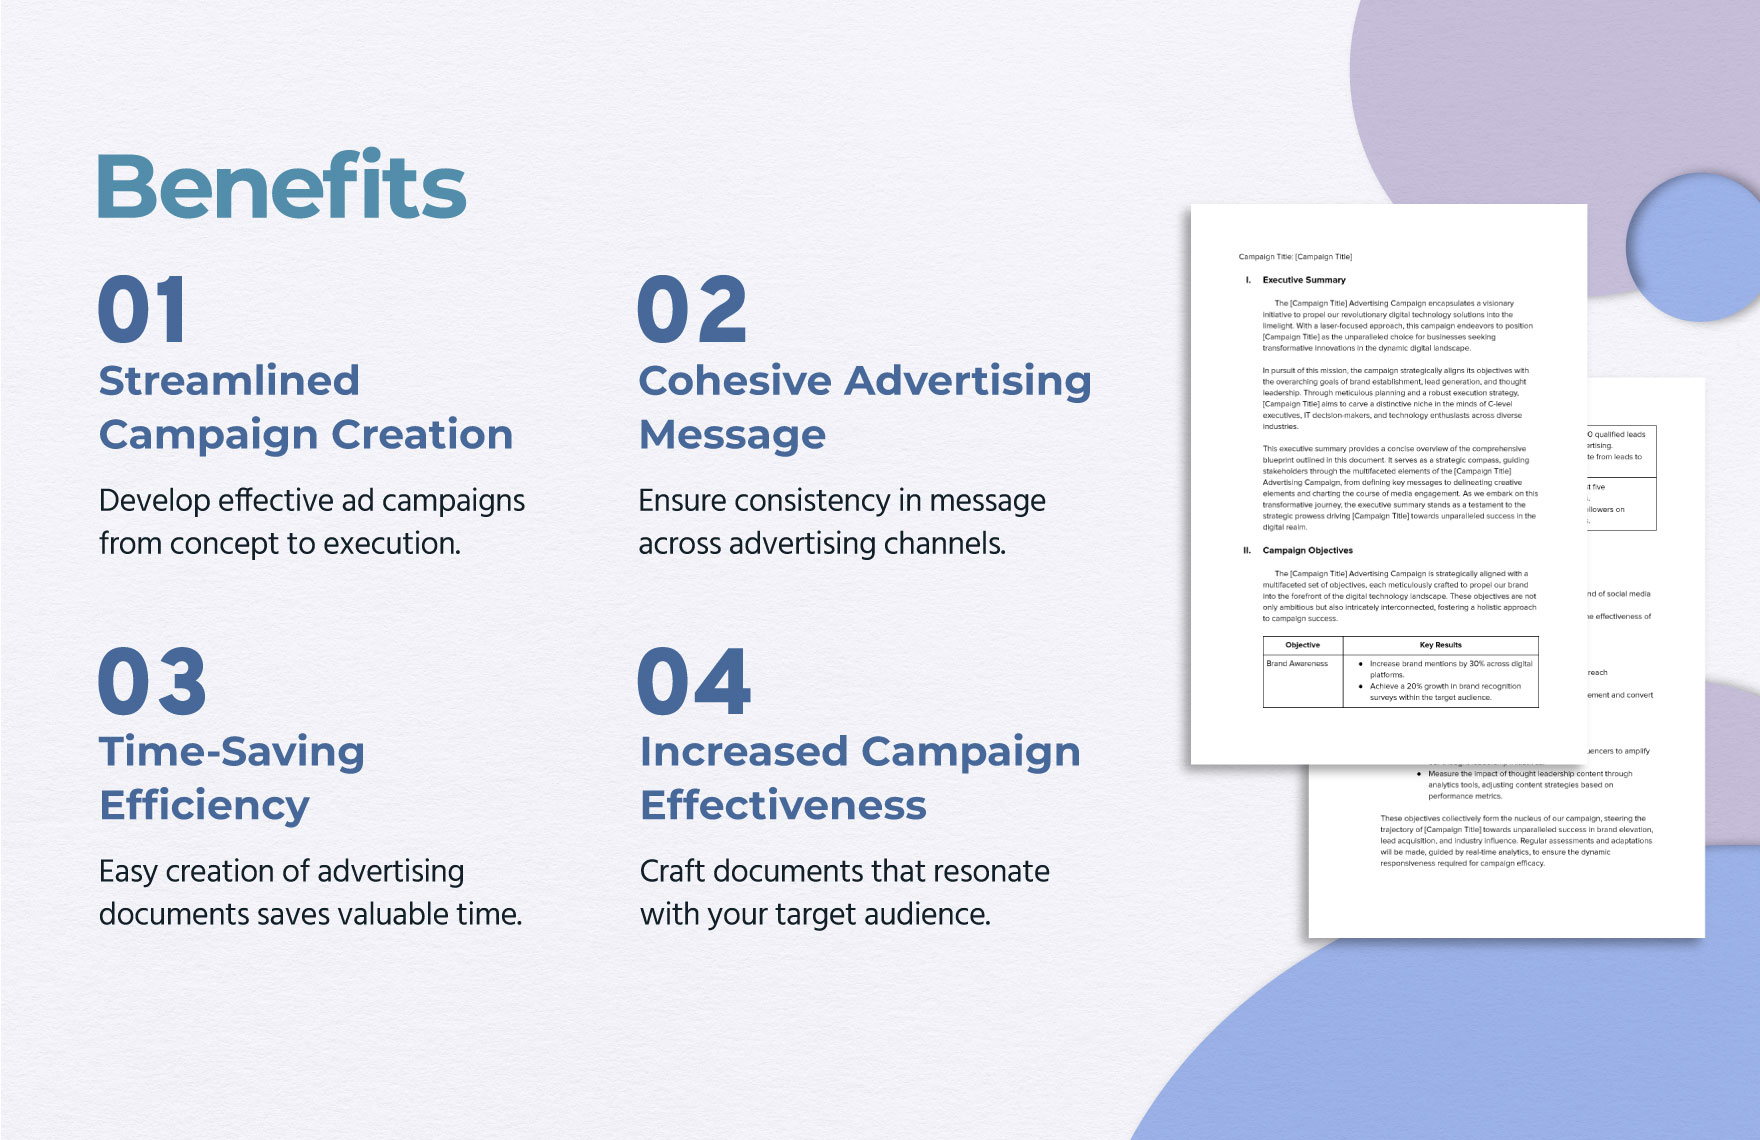 Advertising Campaign Document Template